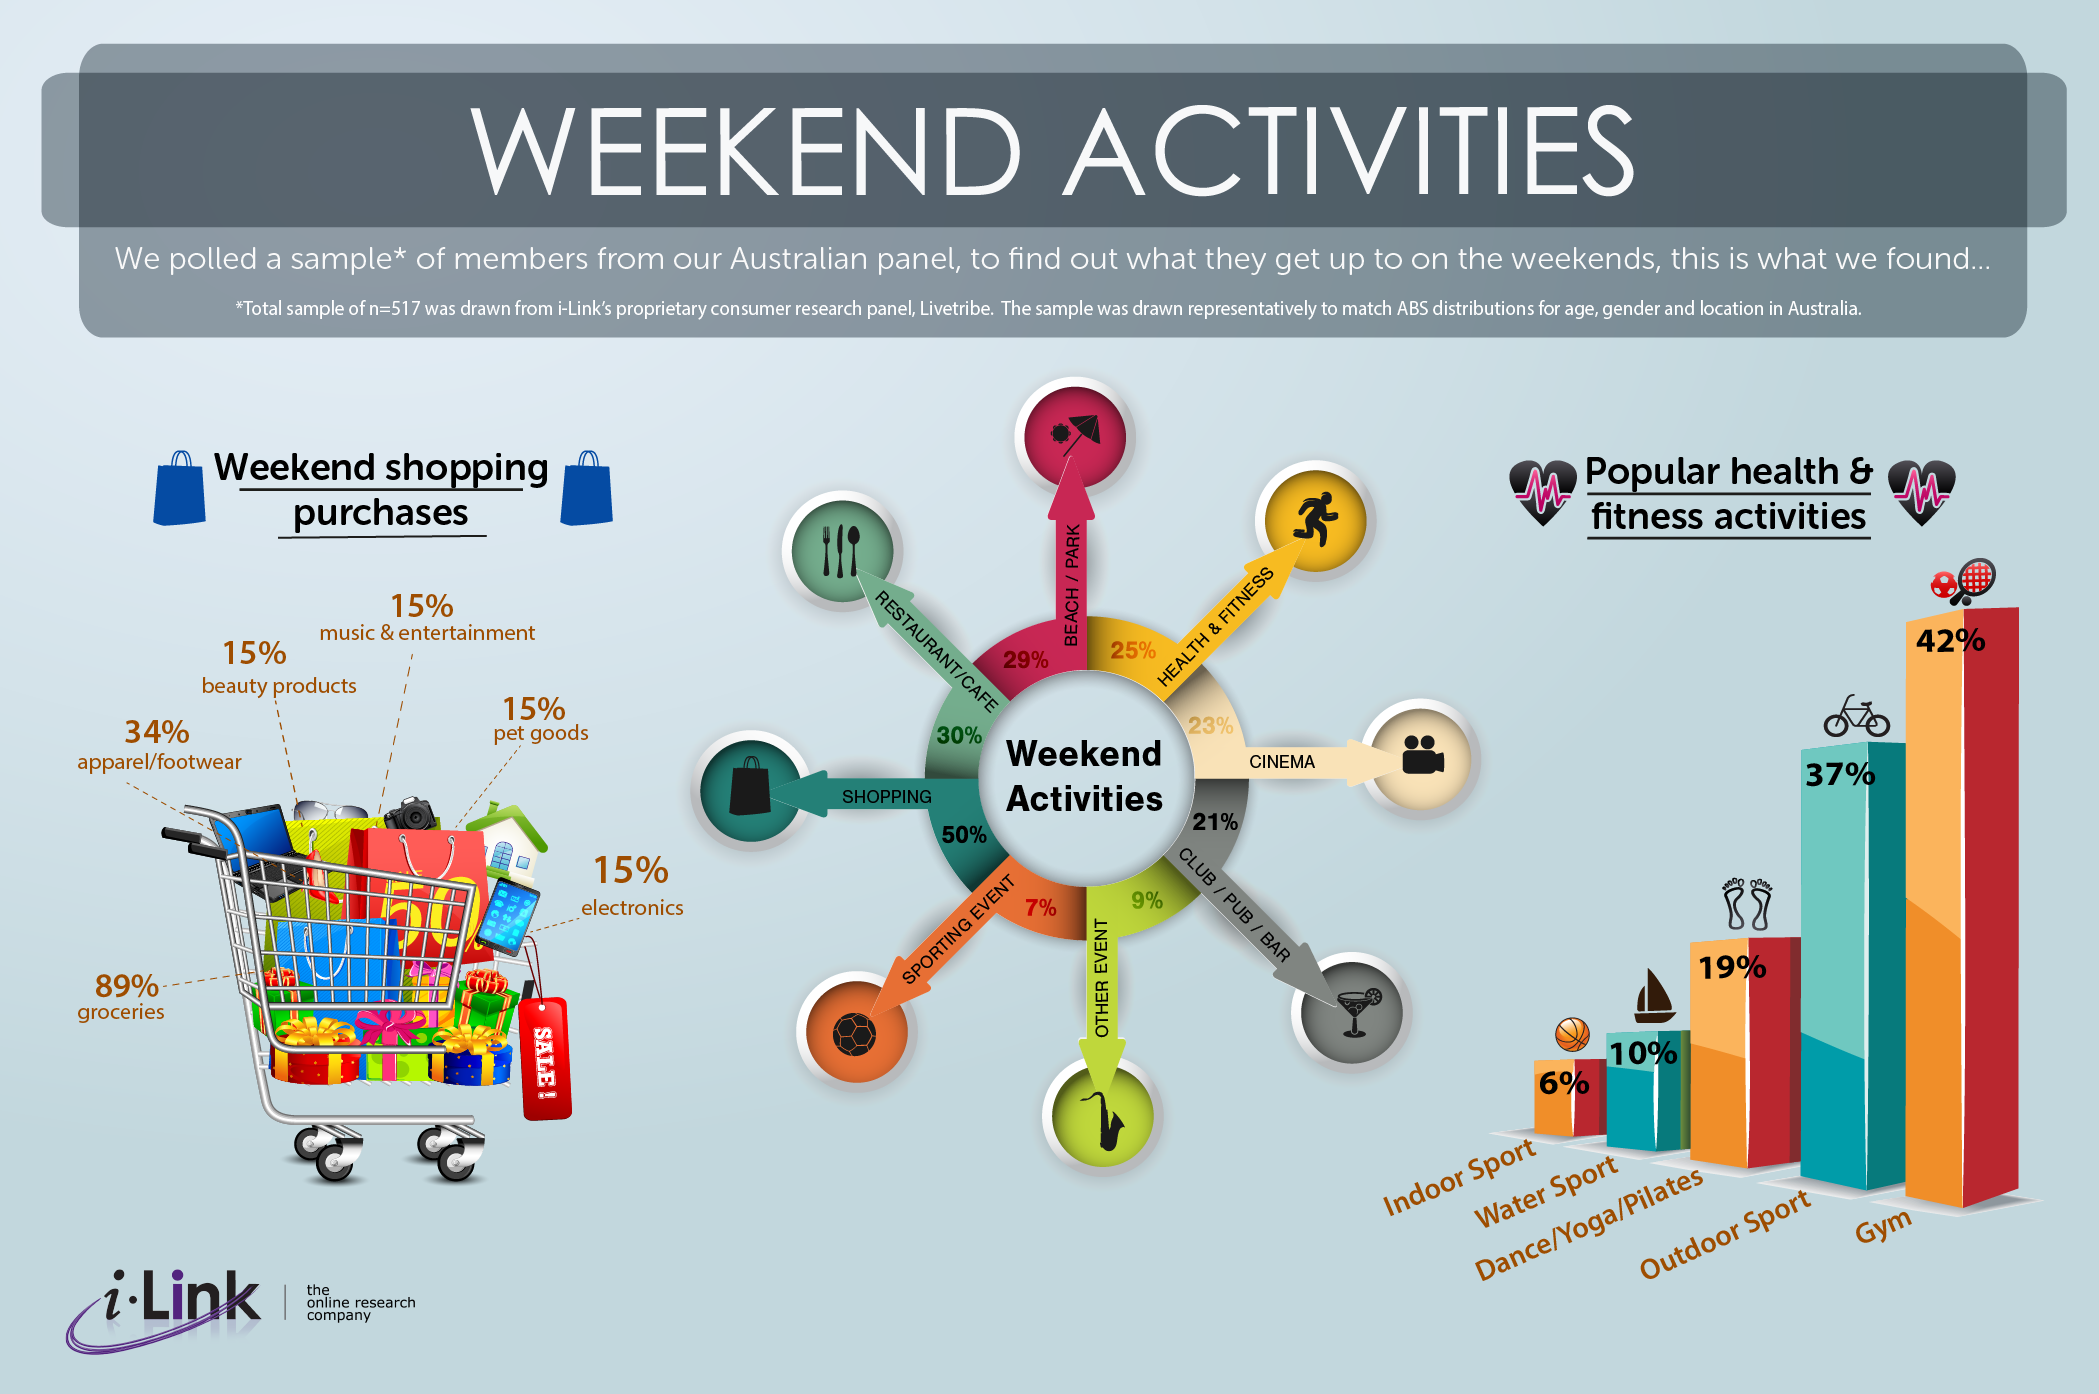 Weekend activities. Plans for the weekend. Weekends activities. Activities for the weekend. Active weekend.